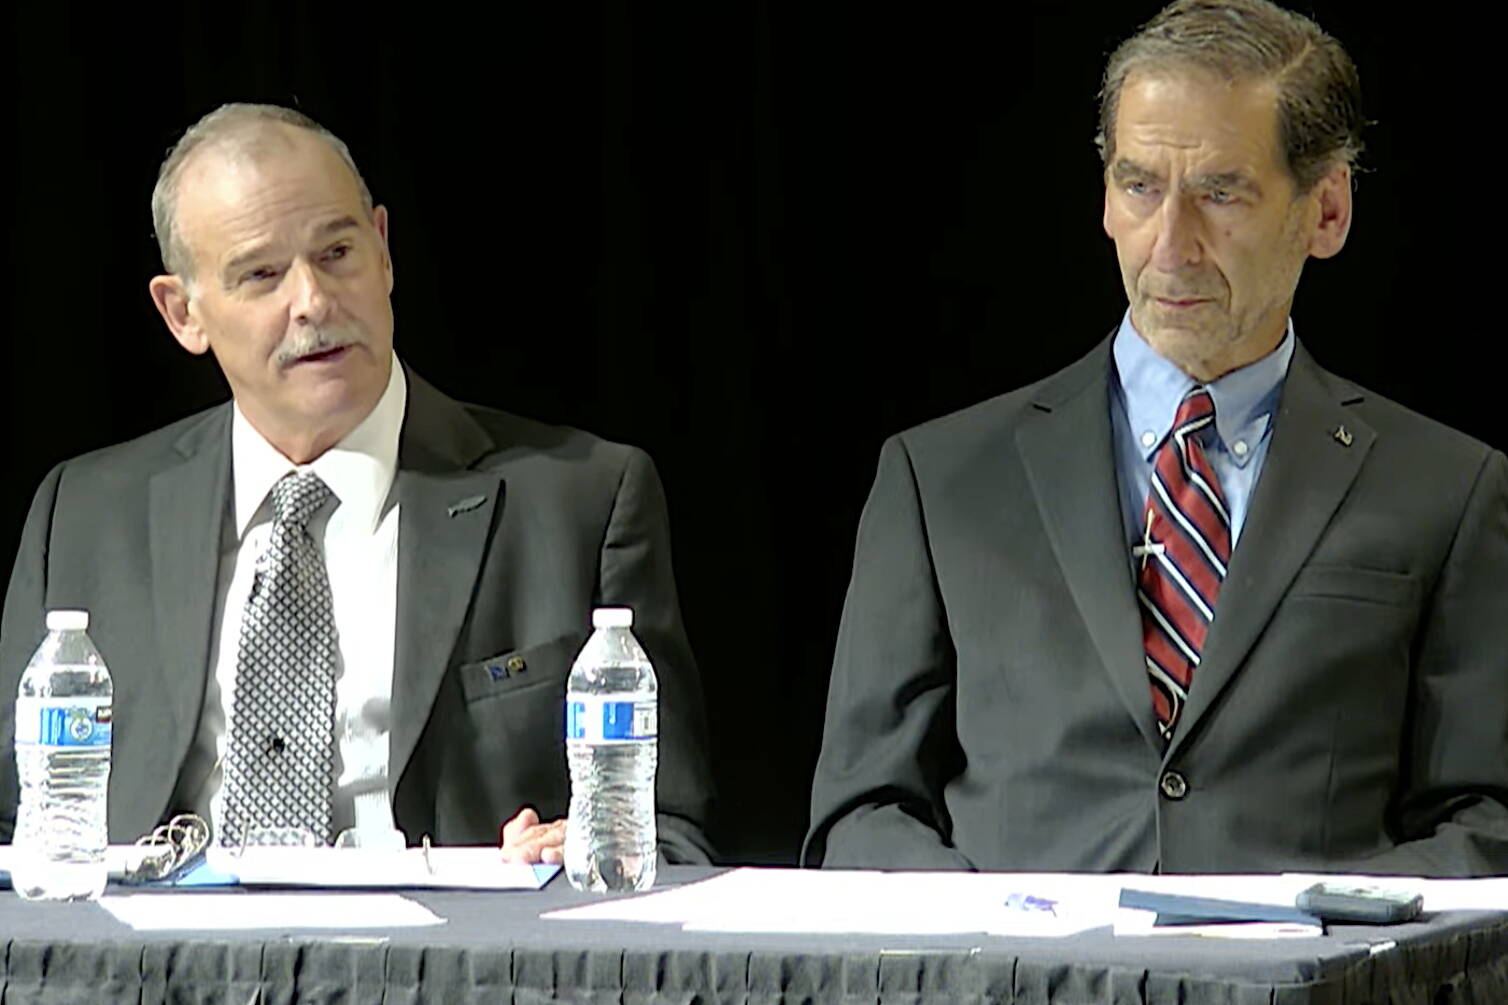 Screenshot / Alaska Public Media’s YouTube channel
Bob Bird, left, chairman of the Alaskan Independence Party, and former Lt. Gov. Loren Leman make the case in favor of a state constitutional convention during a debate in Anchorage broadcast Thursday by Alaska Public Media.
Bob Bird, left, chairman of the Alaskan Independence Party, and former Lt. Gov. Loren Leman make the case in favor of a state constitutional convention during a debate in Anchorage broadcast Thursday by Alaska Public Media. (Screenshot from Alaska Public Media’s YouTube channel)